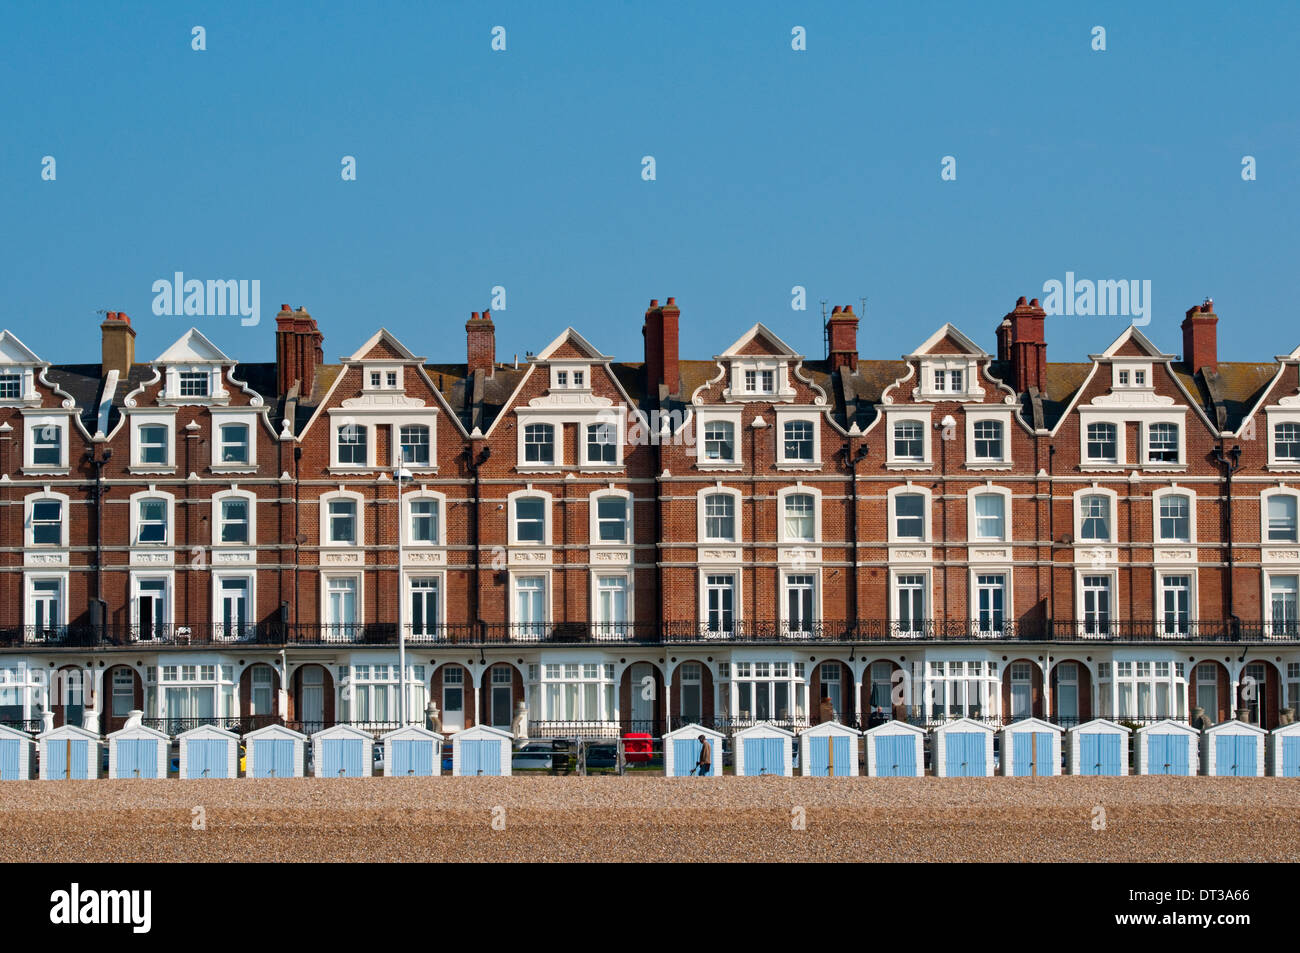 Grade II listed Queen Anne style Victorian terraced houses in Bexhill, East Sussex, England Stock Photo